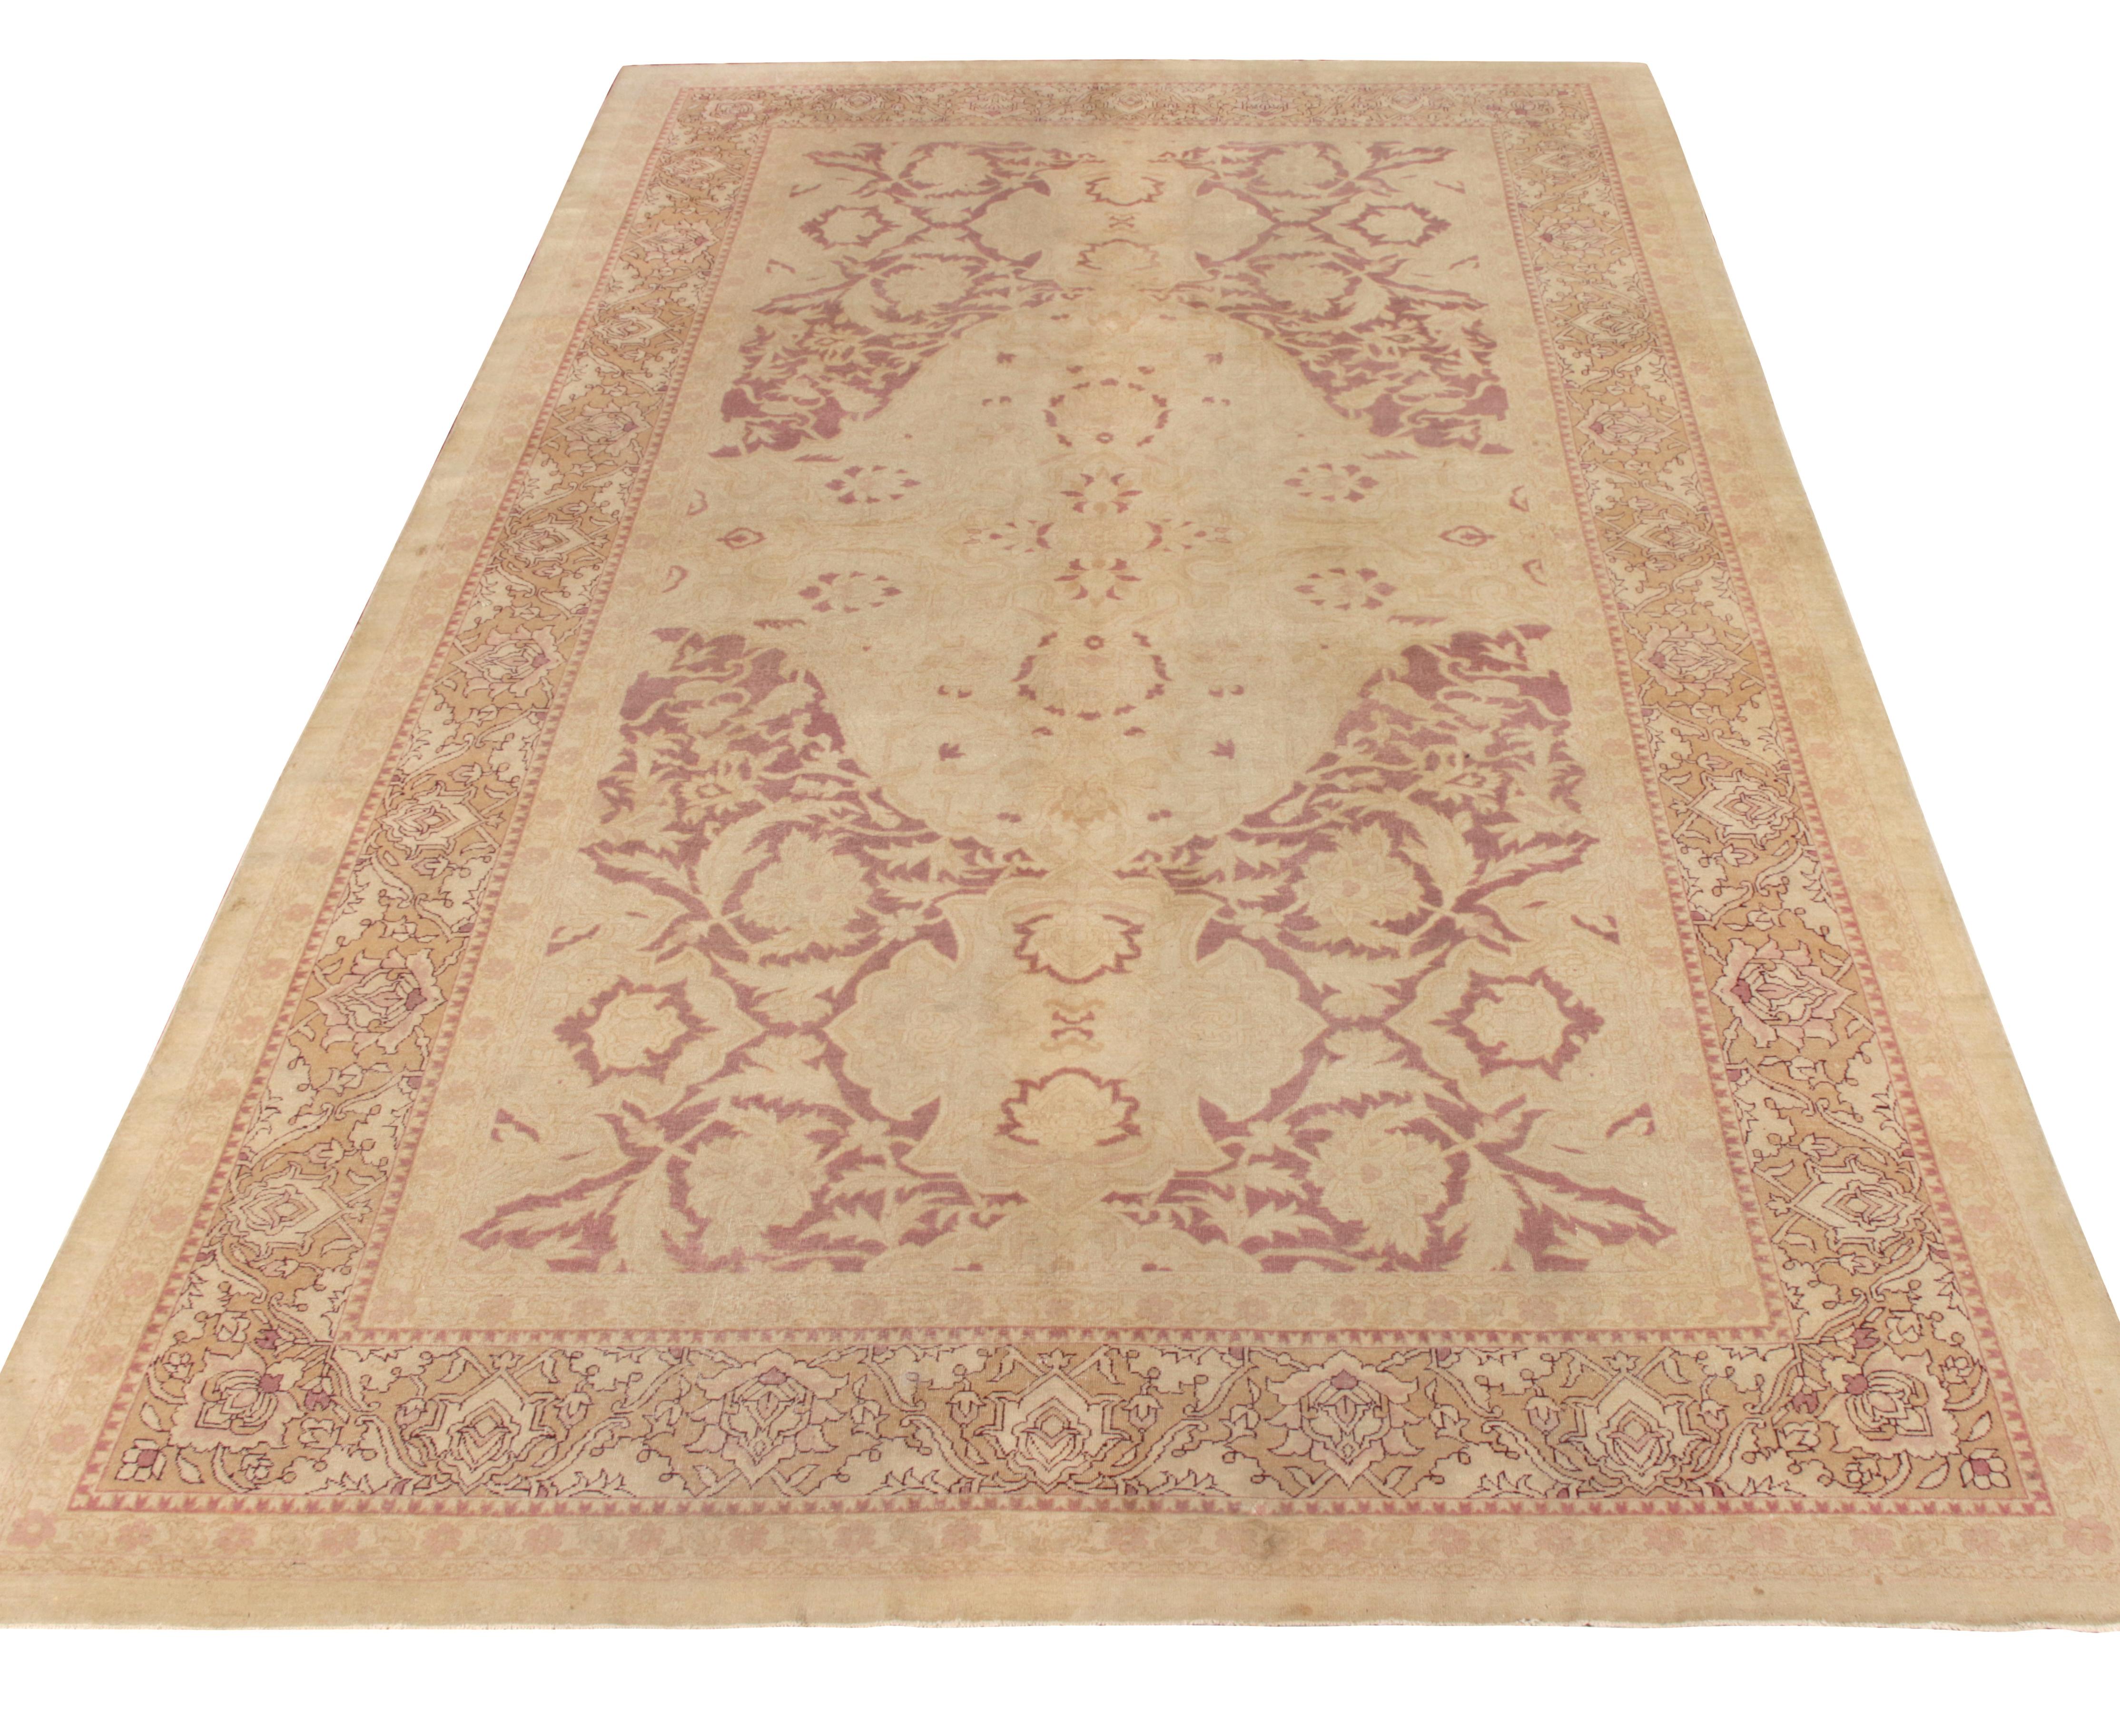 An antique 9 x 15 Amritsar rug masterpiece joining Rug & Kilim’s distinguished antique collection. Hand knotted in wool from India circa 1920–1930, the rug celebrates the unique “jail rug” medallion style in elegant-yet-forgiving pink and